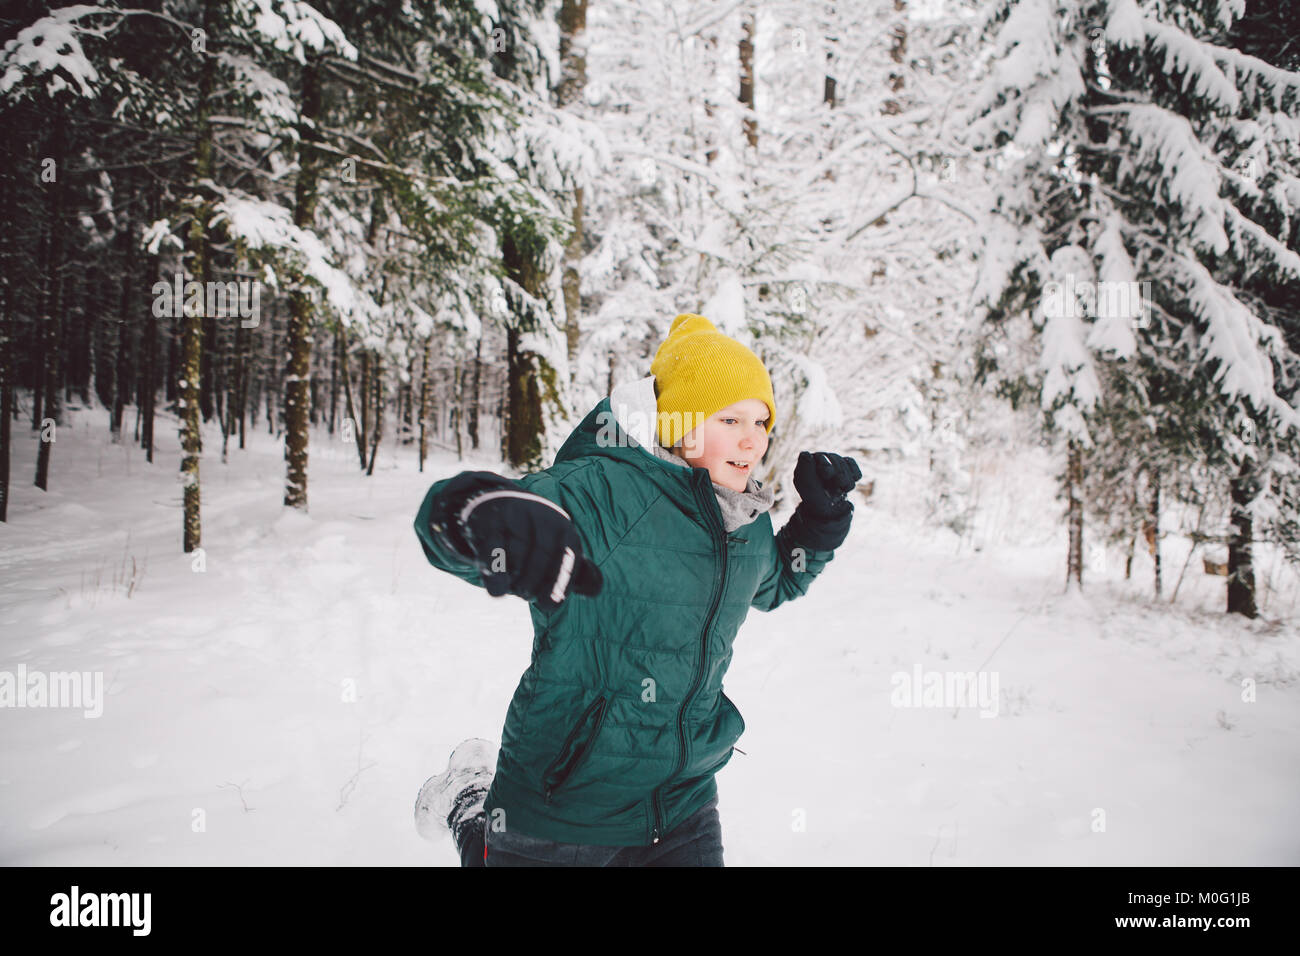 A teenage boy runs in a winter forest full of deep snow. Stock Photo